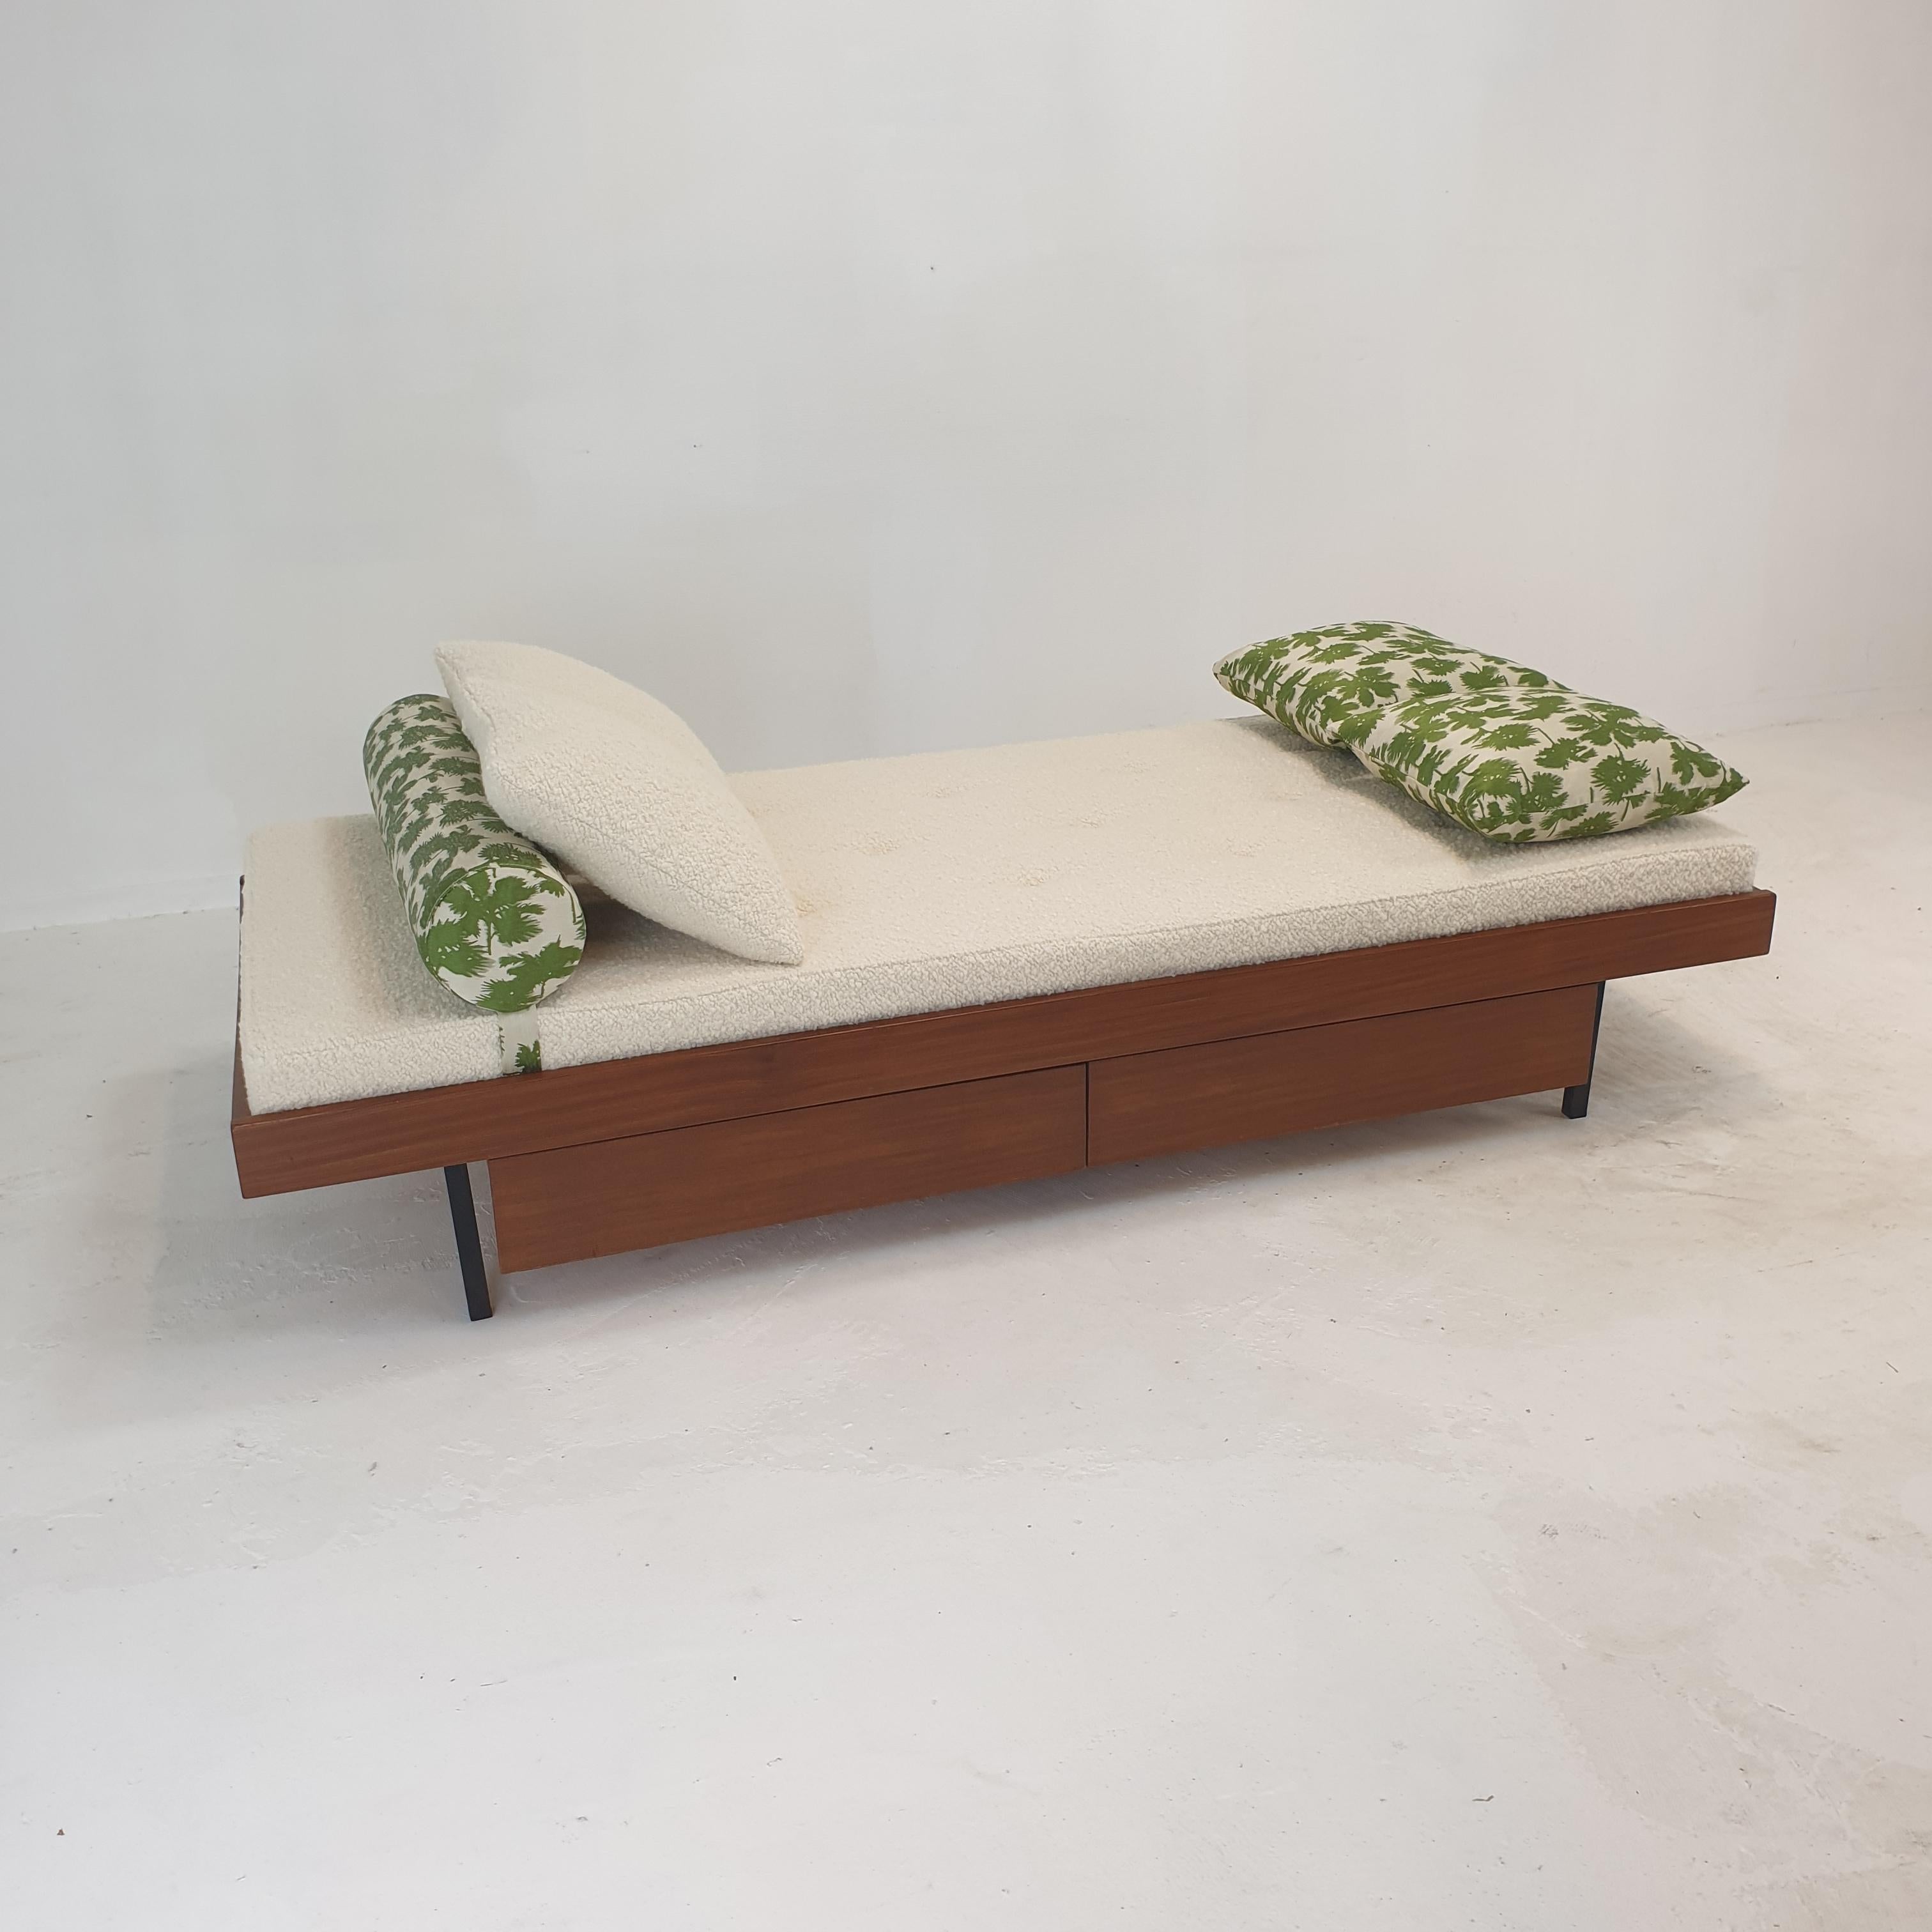 Dutch Teak Daybed with Dedar Cushions and Bolster, 1960s For Sale